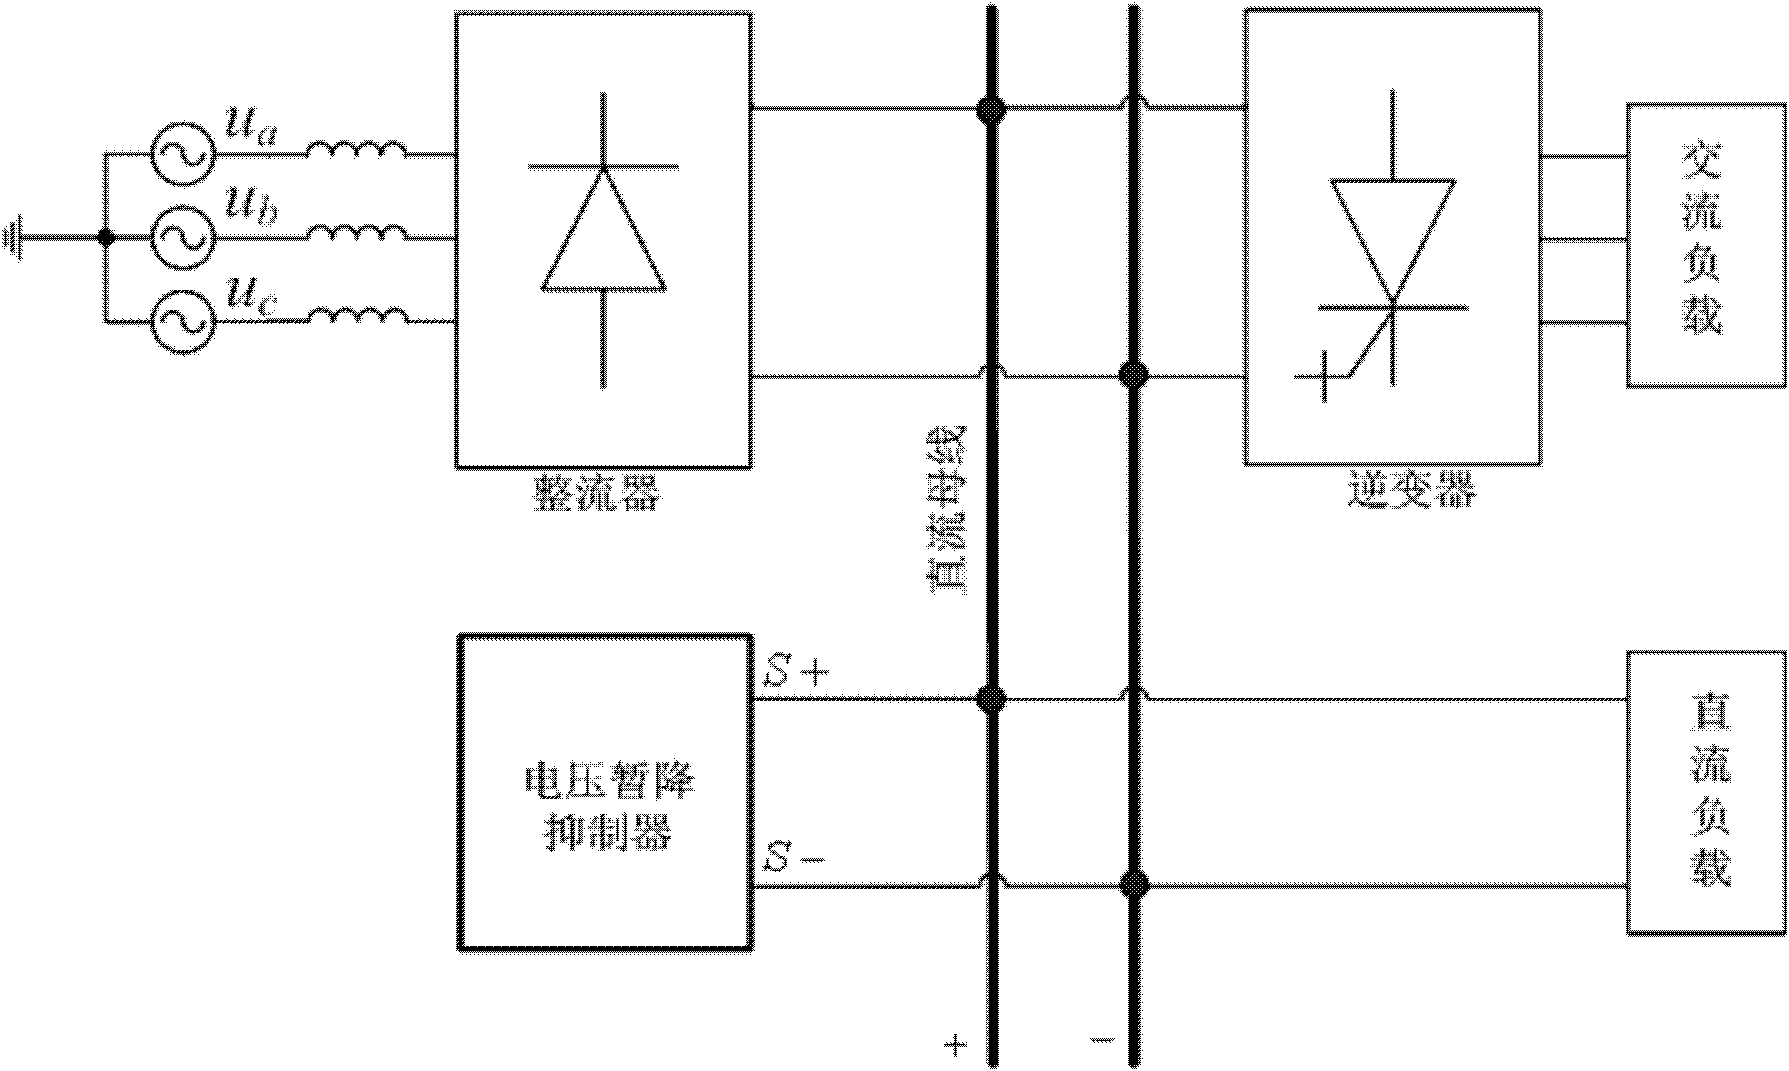 Super-capacitor-based DC voltage sag suppression device and suppression method thereof